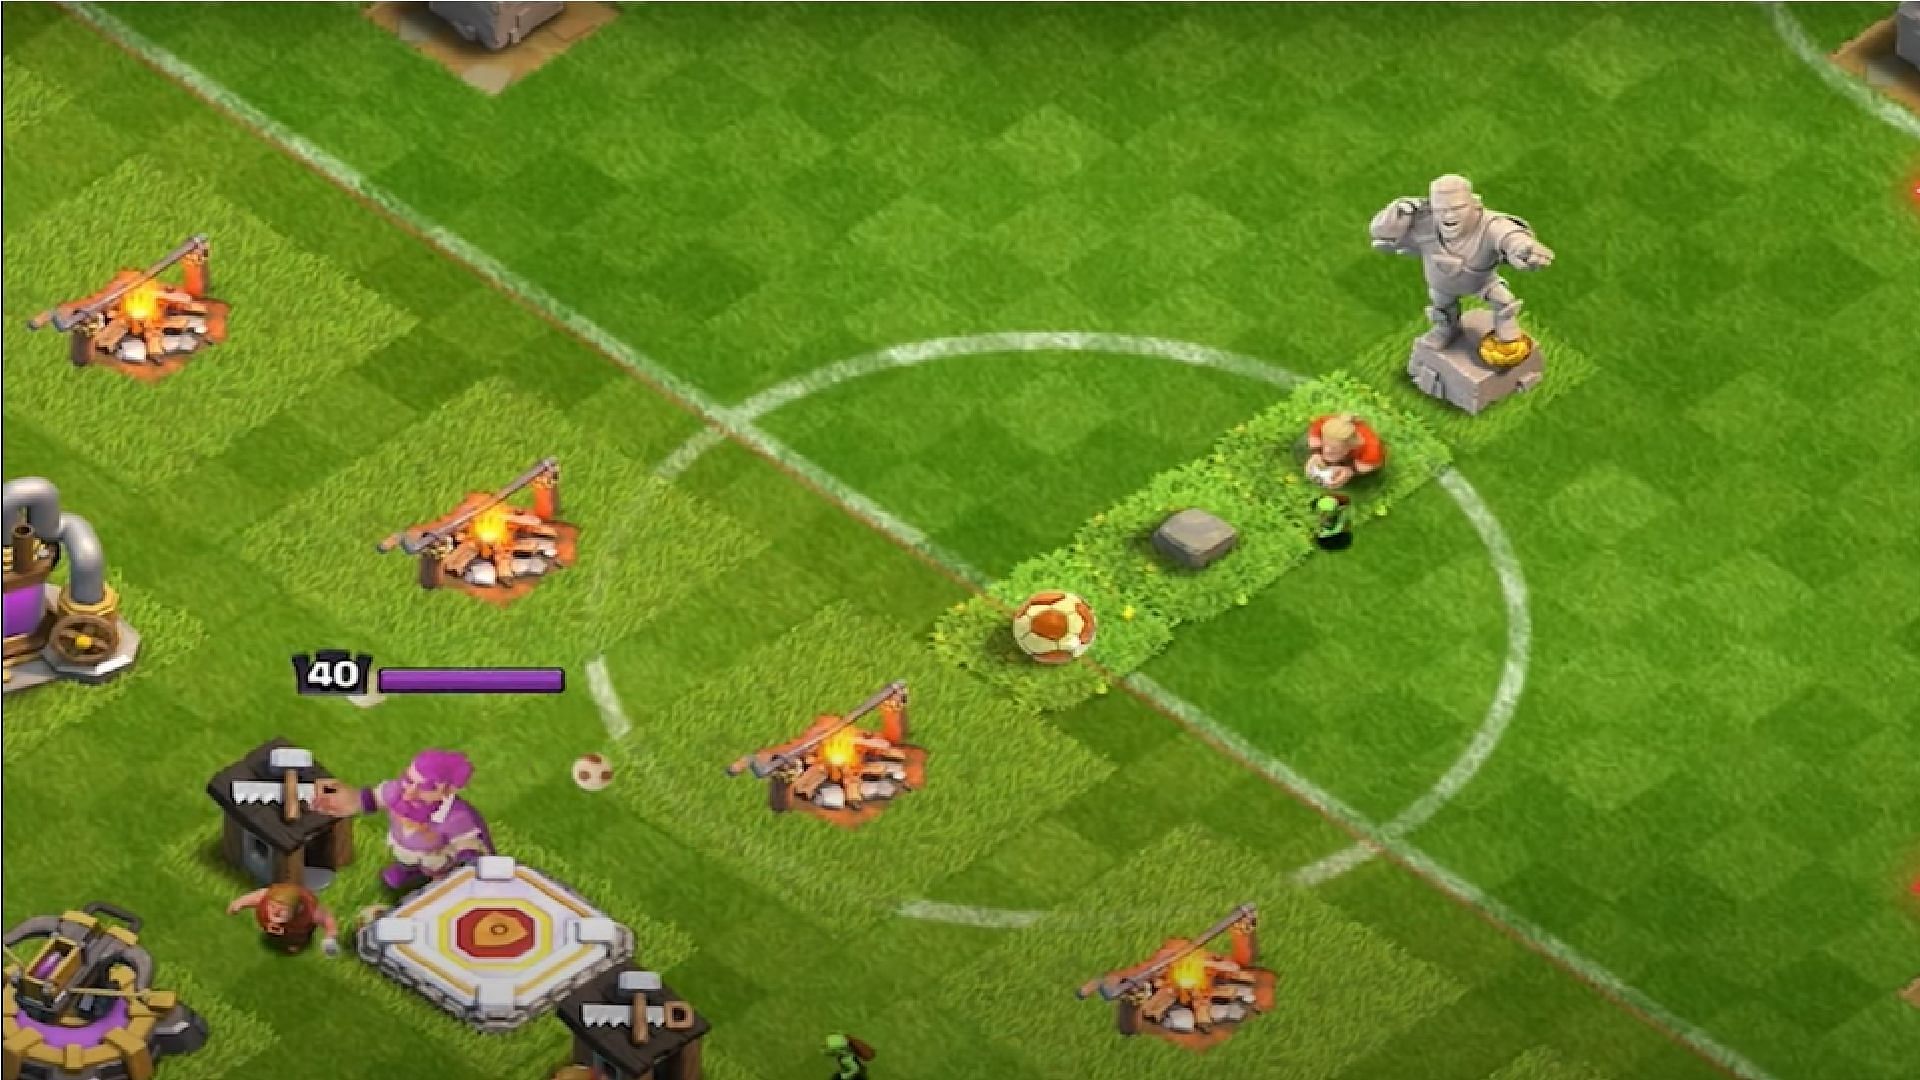 Deploy the first Barbarian Kicker in-line with the Haaland Statue in the middle to target the Warden (Image via Supercell)